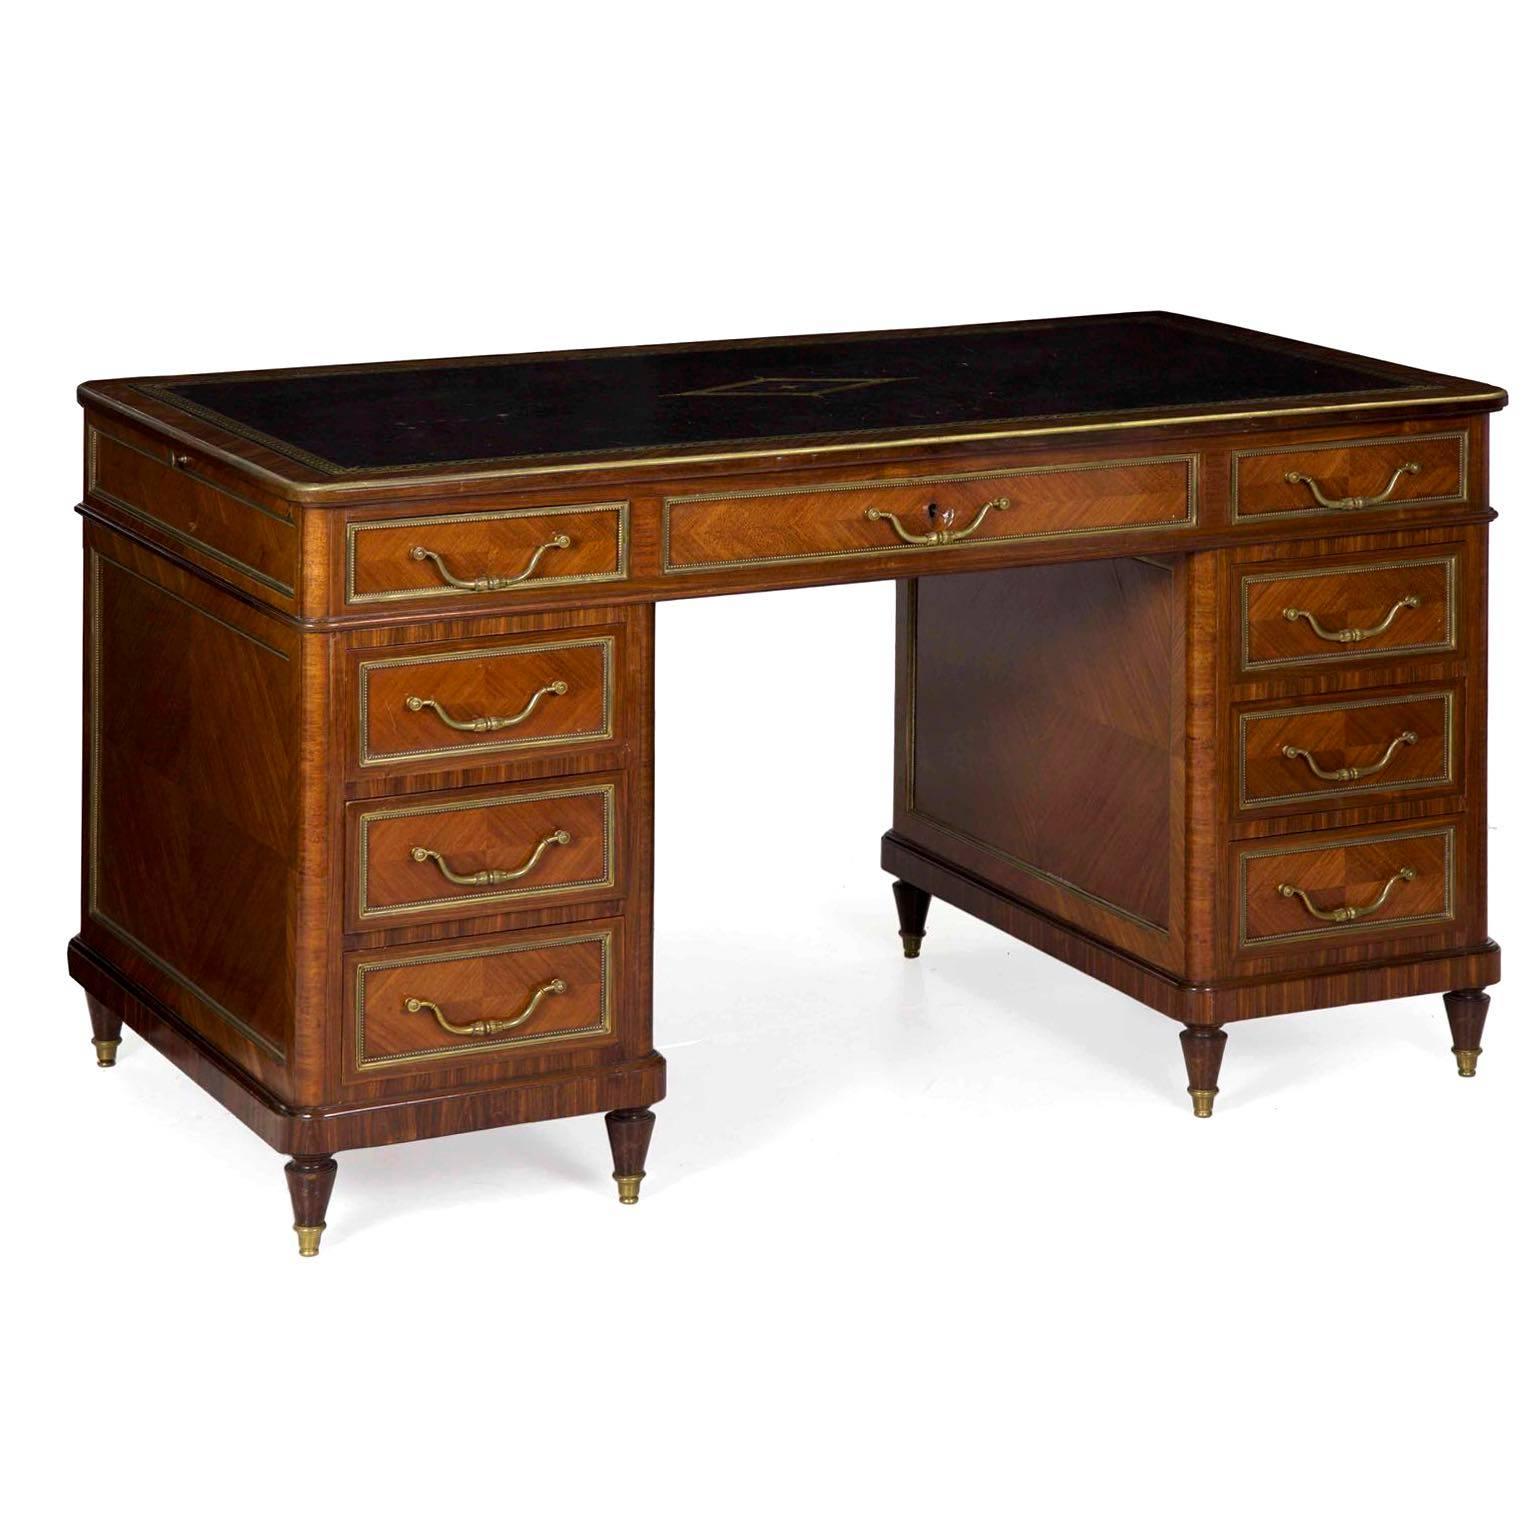 This finely crafted desk has such variety of rich material - the brass framing elements are of very high quality, each beautifully cast with intricate detailing. The original bail pull handles are exceptional, each with a pair of acanthus bulbs